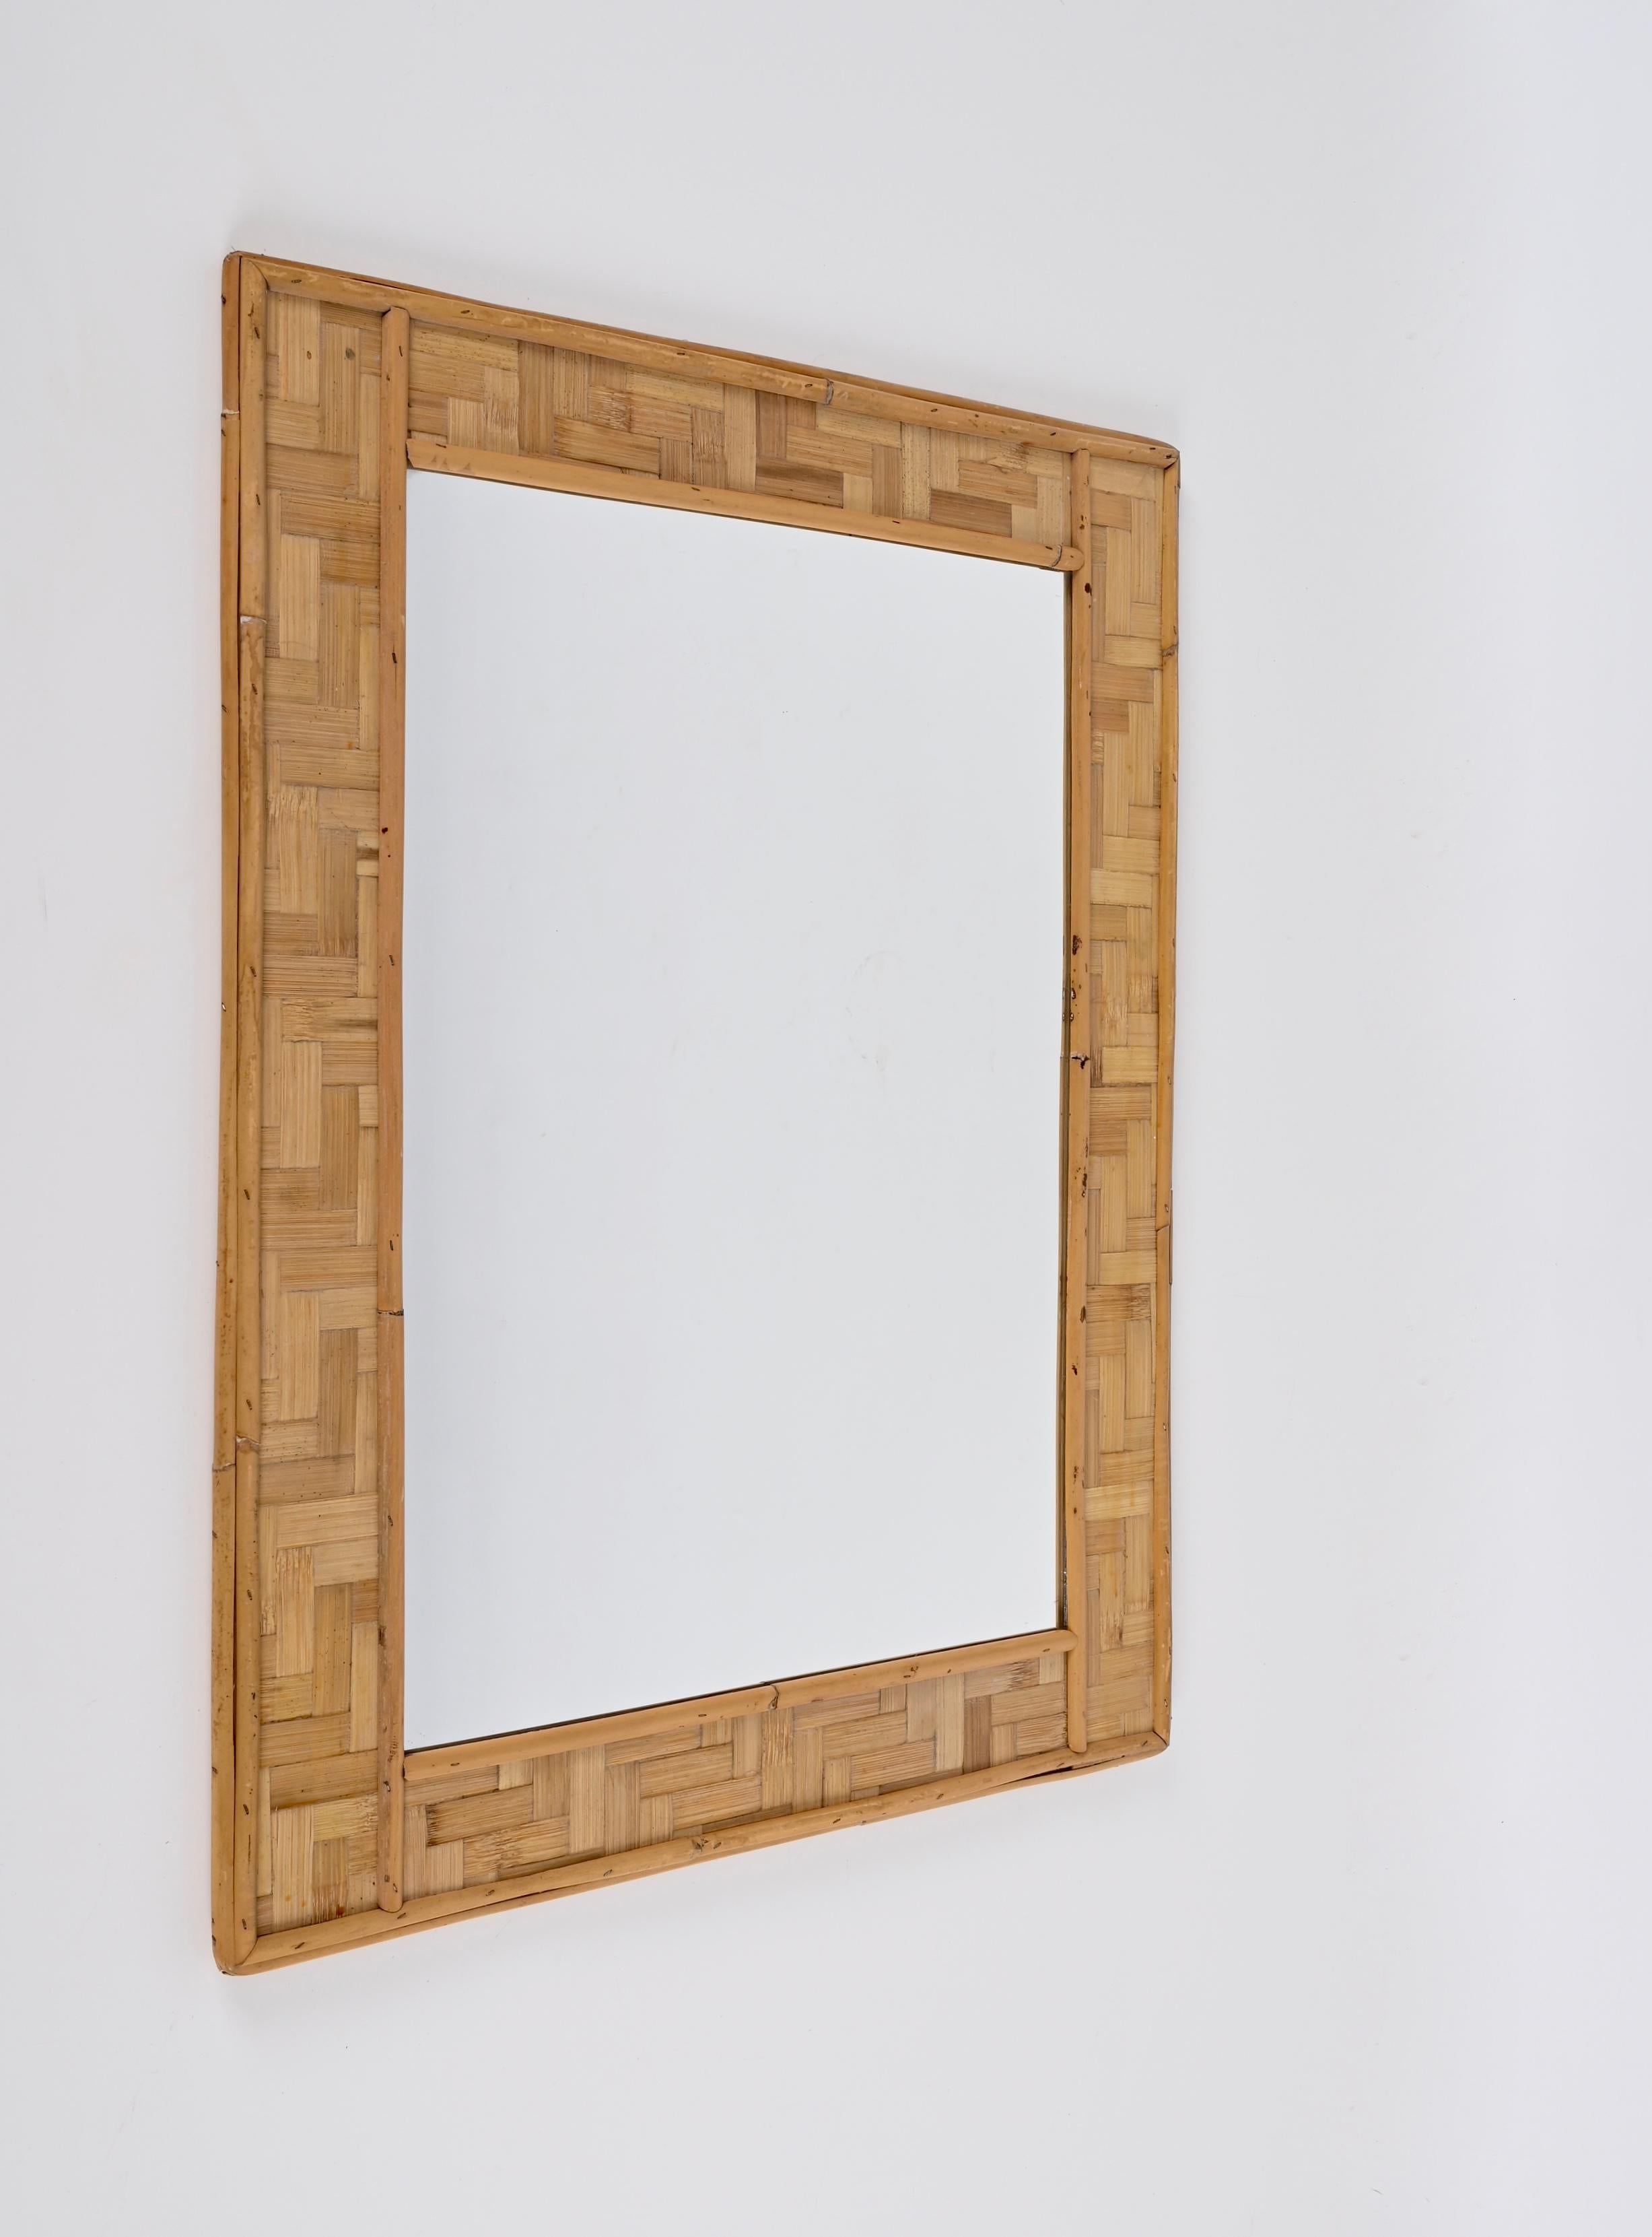 Midcentury Rectangular Bamboo and Woven Rattan Frame Italian Mirror, 1960s For Sale 6